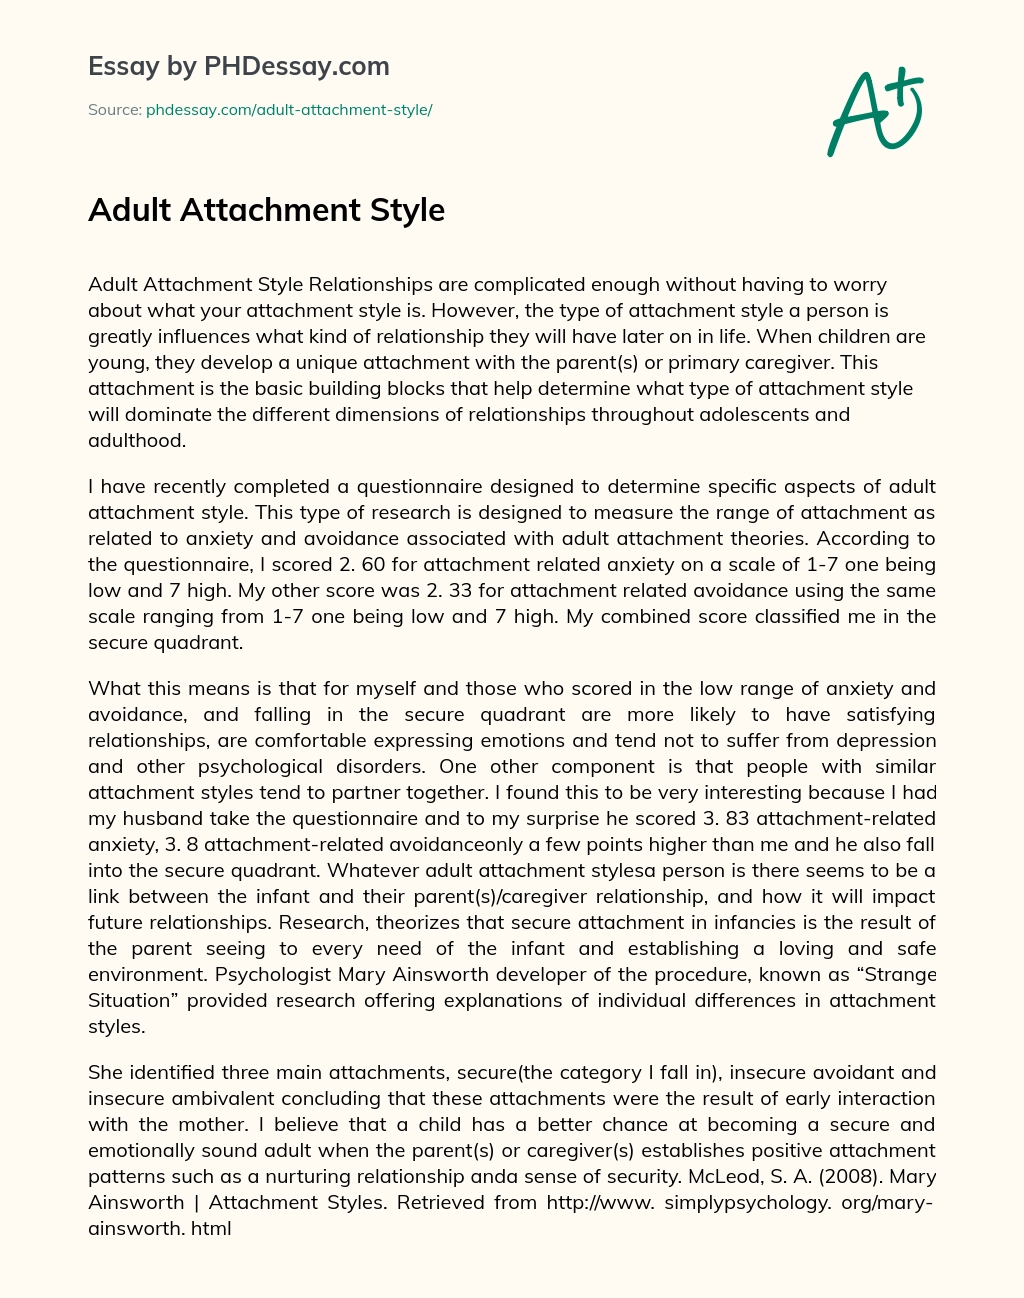 Adult Attachment Style essay